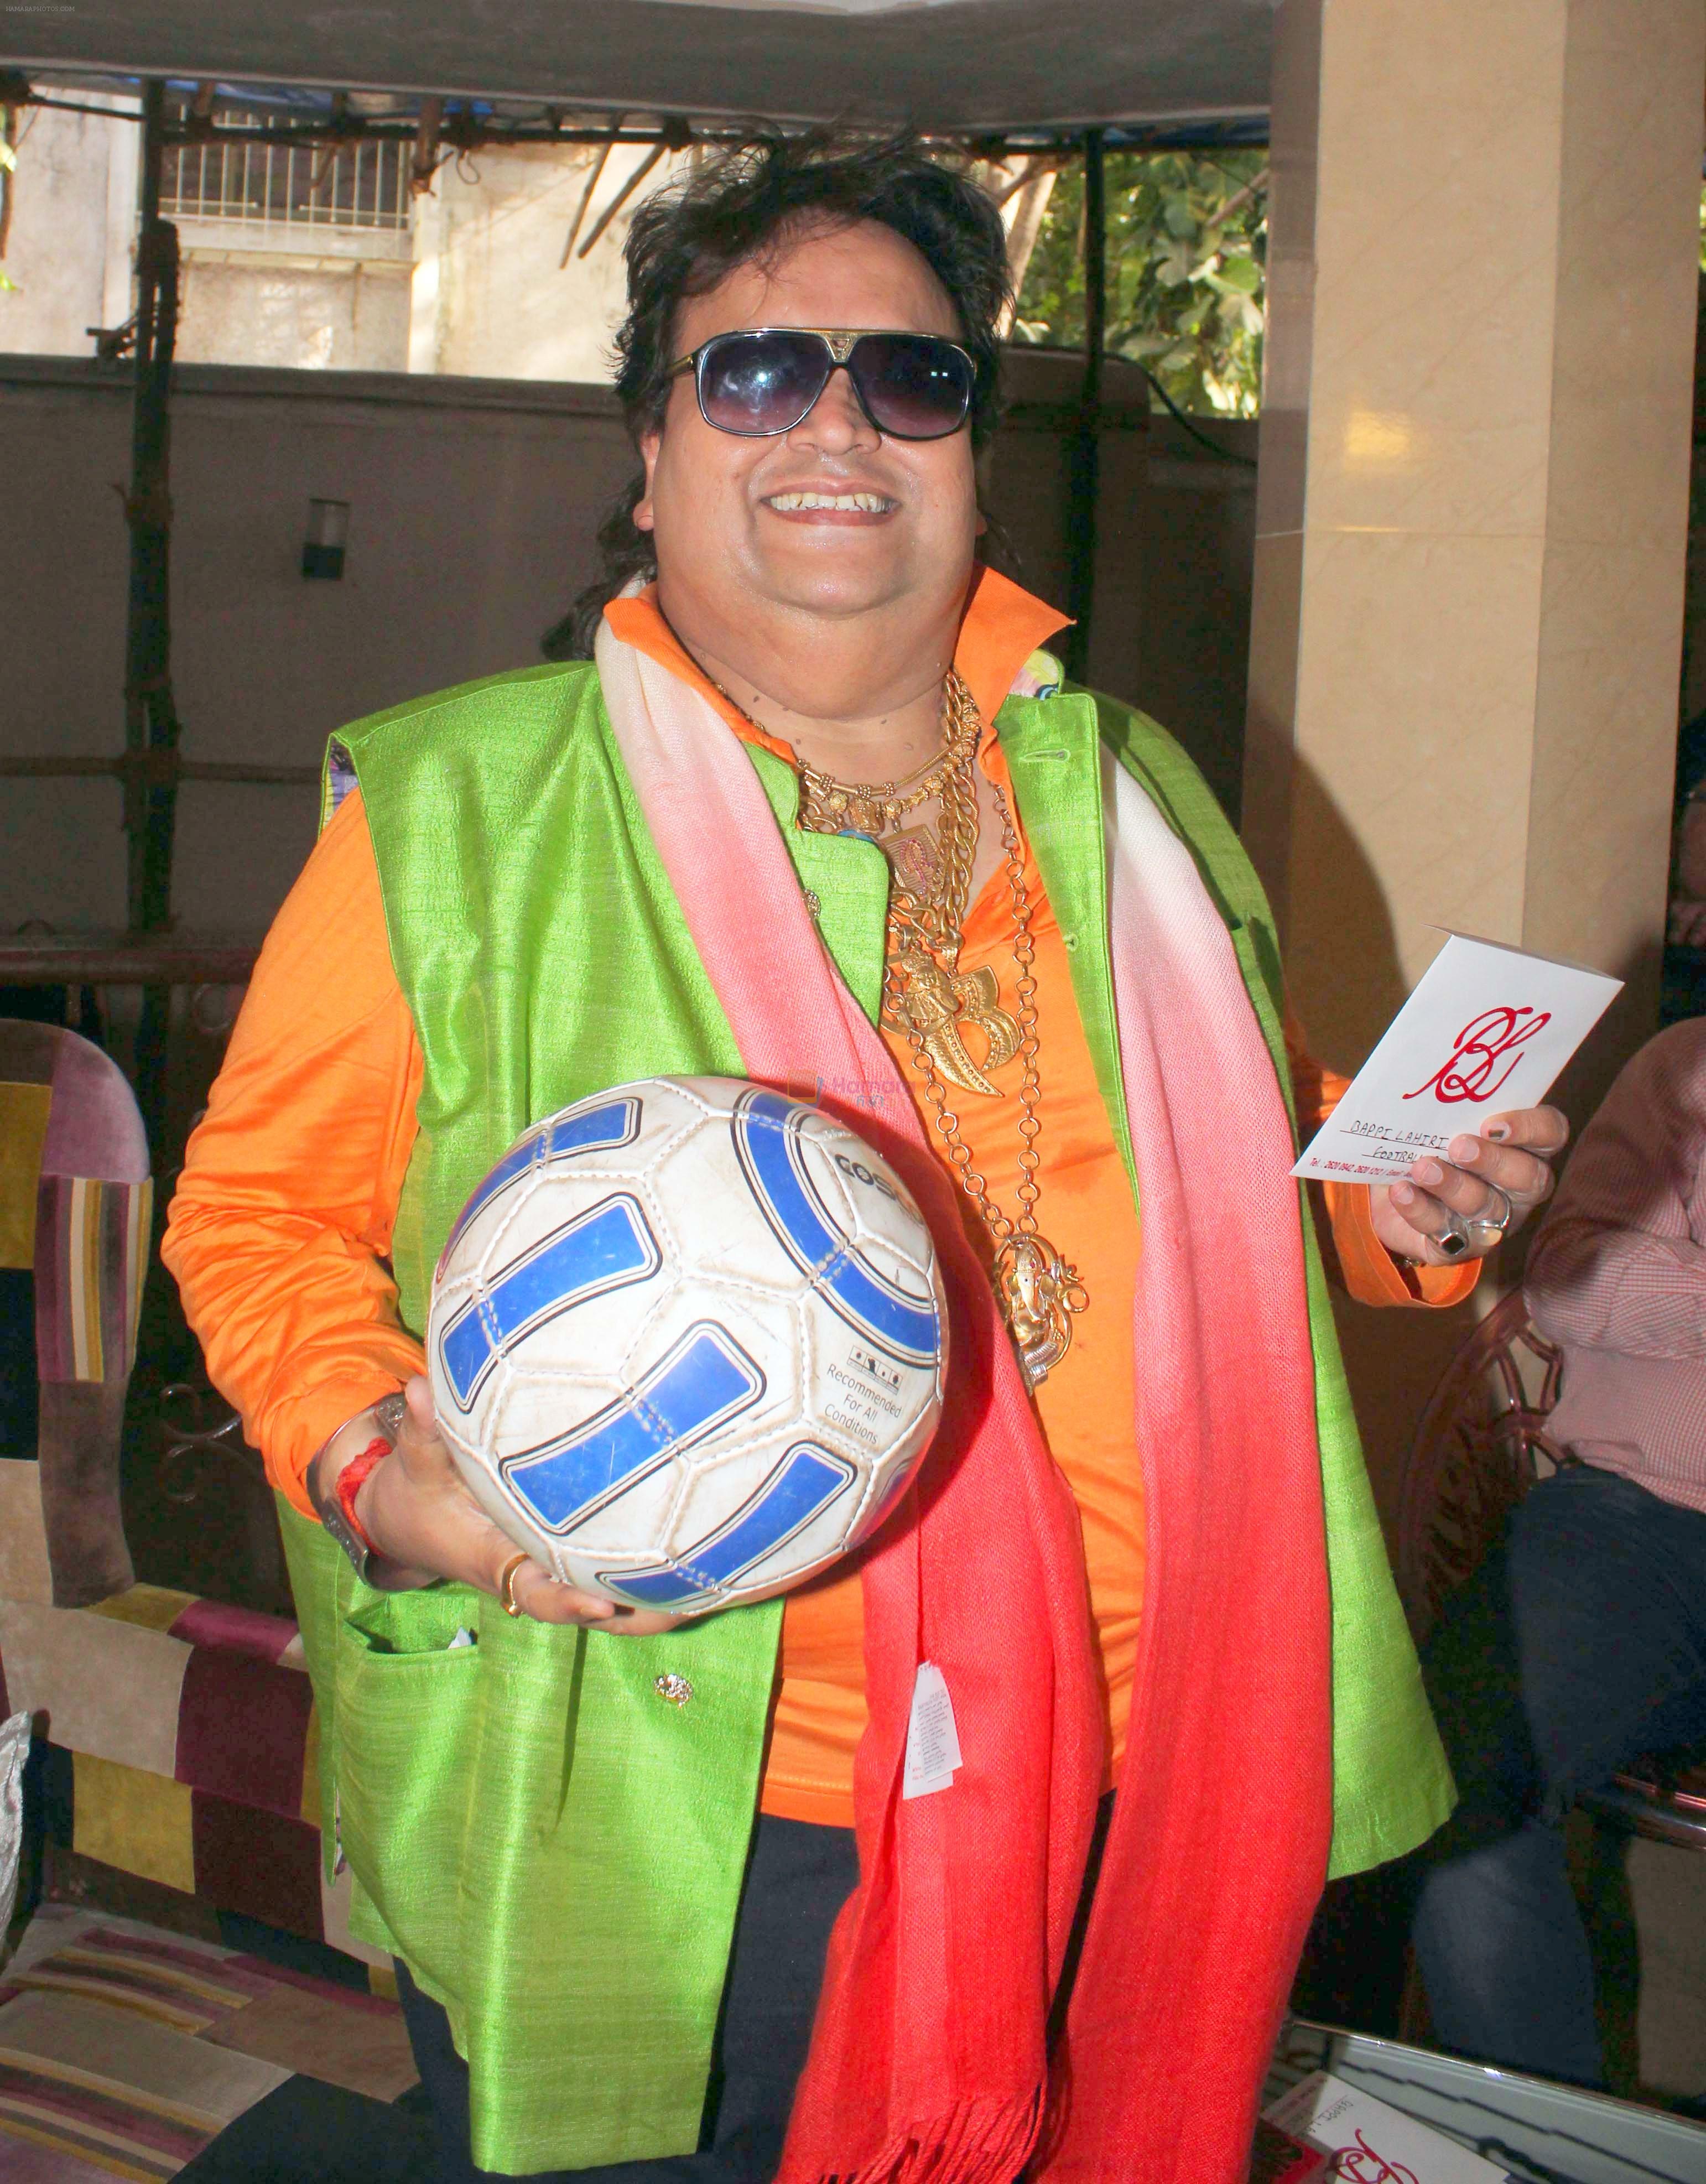 Bappi Lahiri who welcomes the FIFA world cup with his new single _Life of Football_ composed and sung by the legend himself